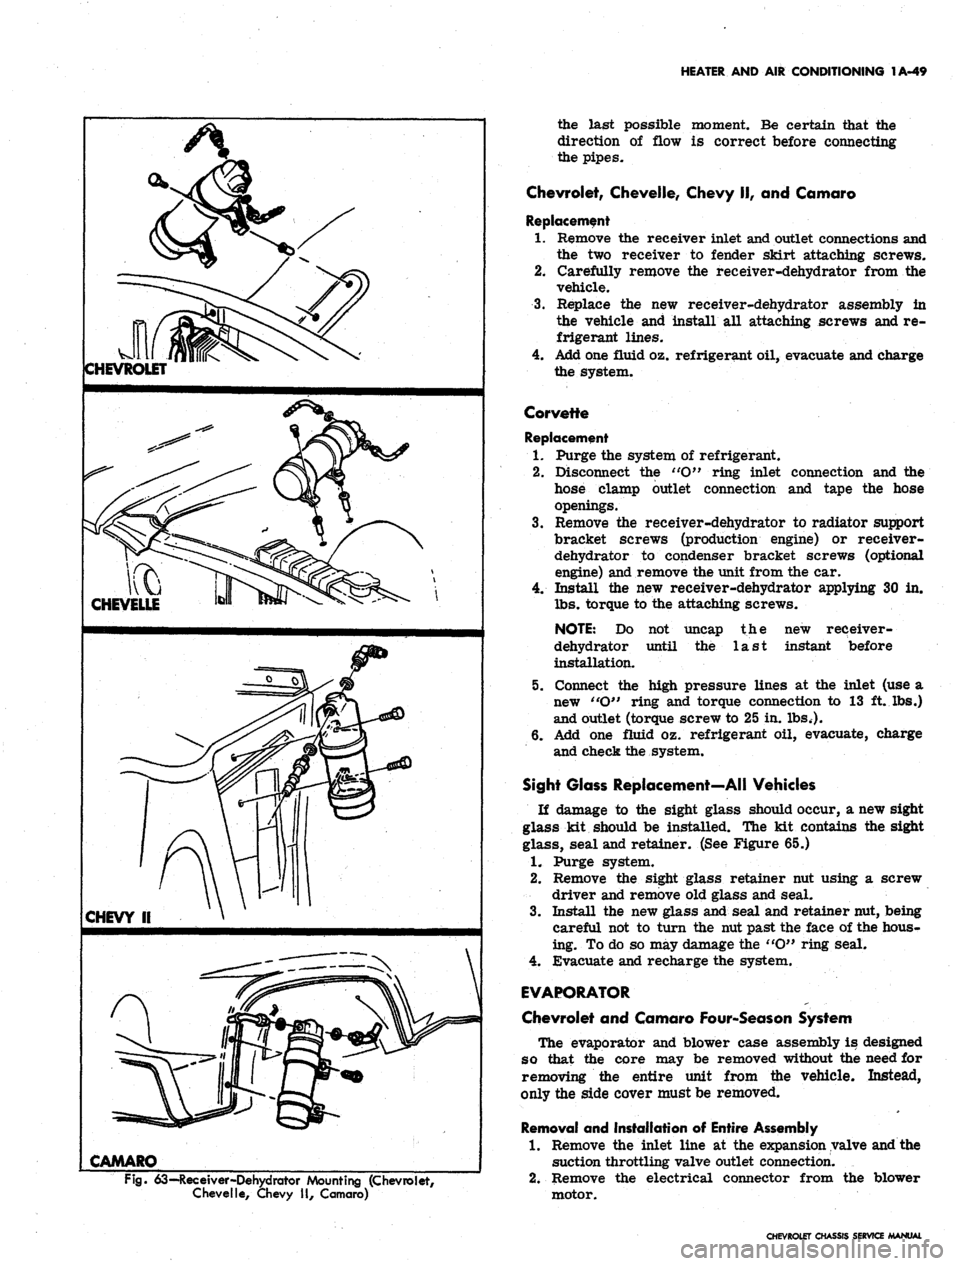 CHEVROLET CAMARO 1967 1.G Chassis Workshop Manual 
HEATER AND AIR CONDITIONING 1A-49

CHEVROLET

CHEVELLE

CHEVY II

CAMARO 
the last possible moment. Be certain that the

direction of flow is correct before connecting

the pipes.

Chevrolet, Chevell